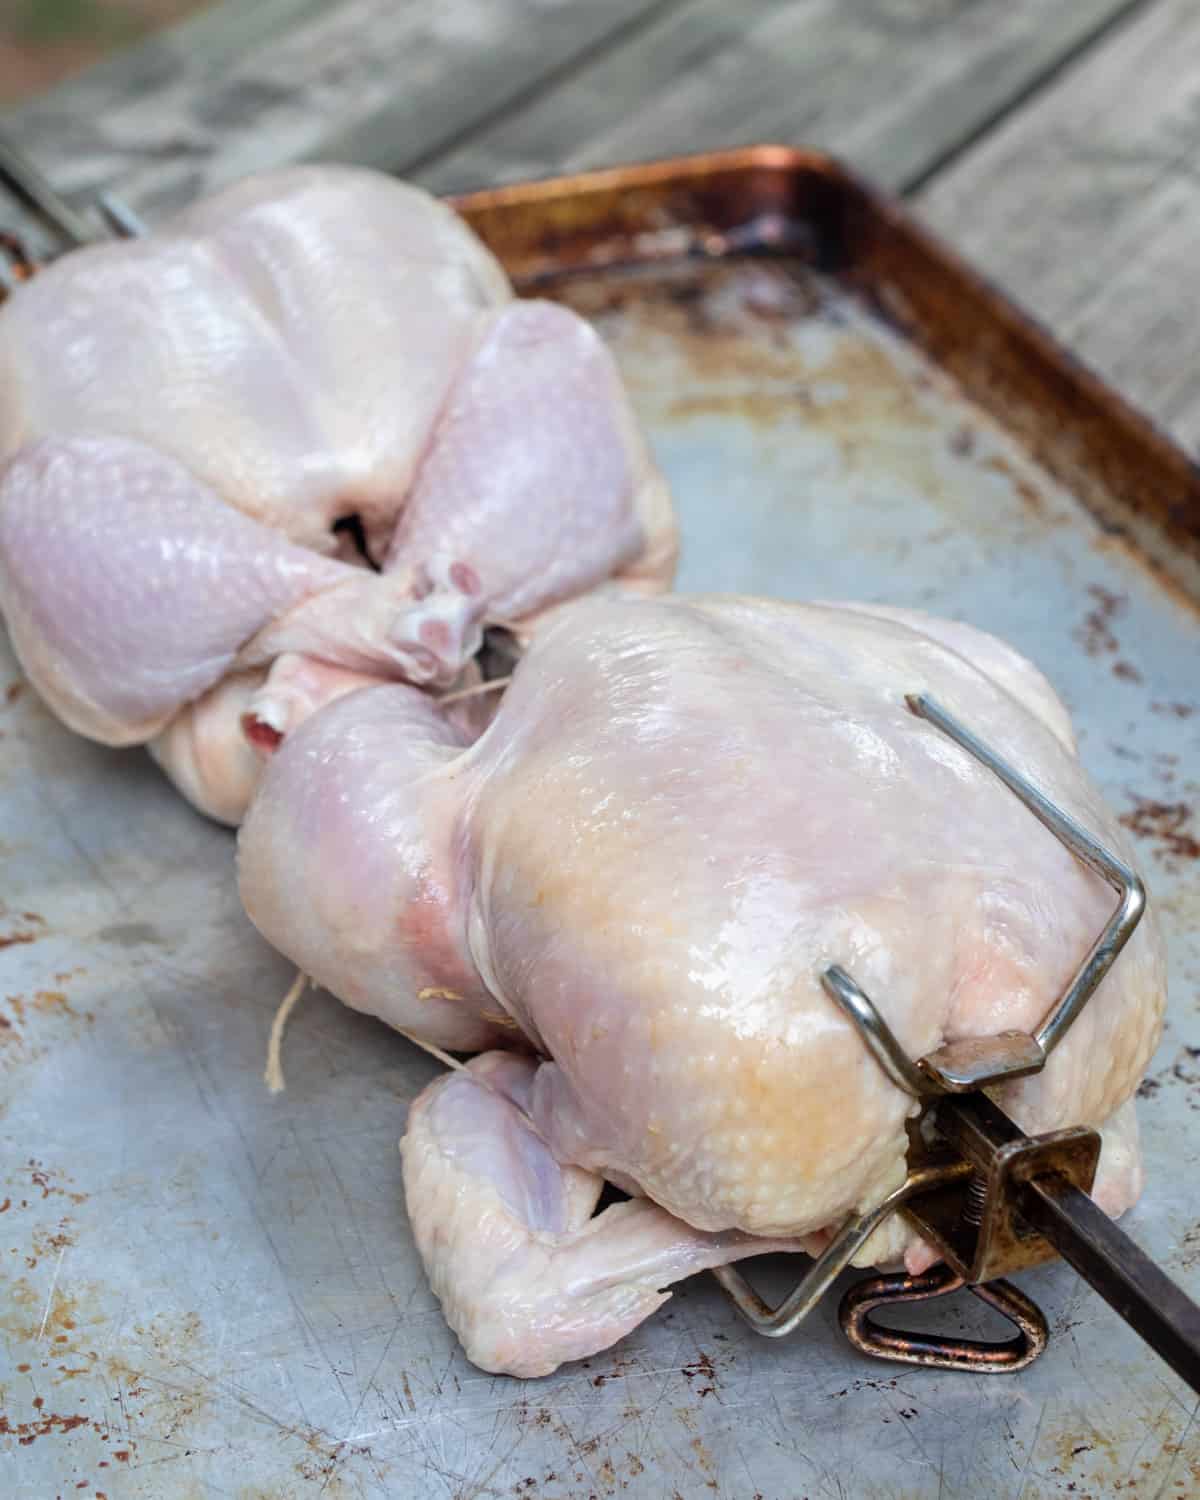 Two raw chickens in a rotisserie spit.